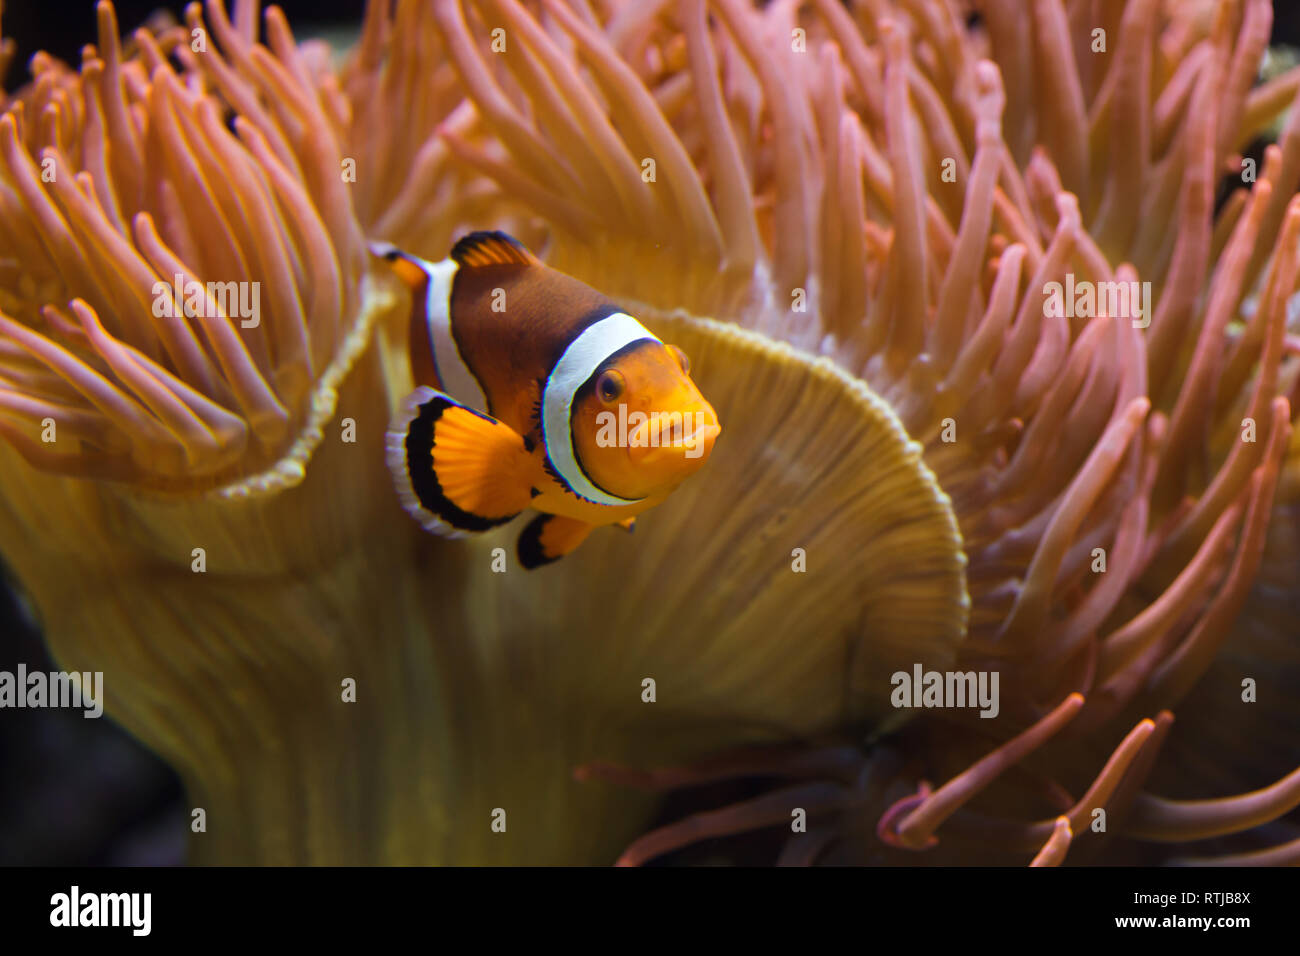 Ocellaris clownfish (Amphiprion ocellaris), also known as the false percula clownfish, swimming in the magnificent sea anemone (Heteractis magnifica). Stock Photo